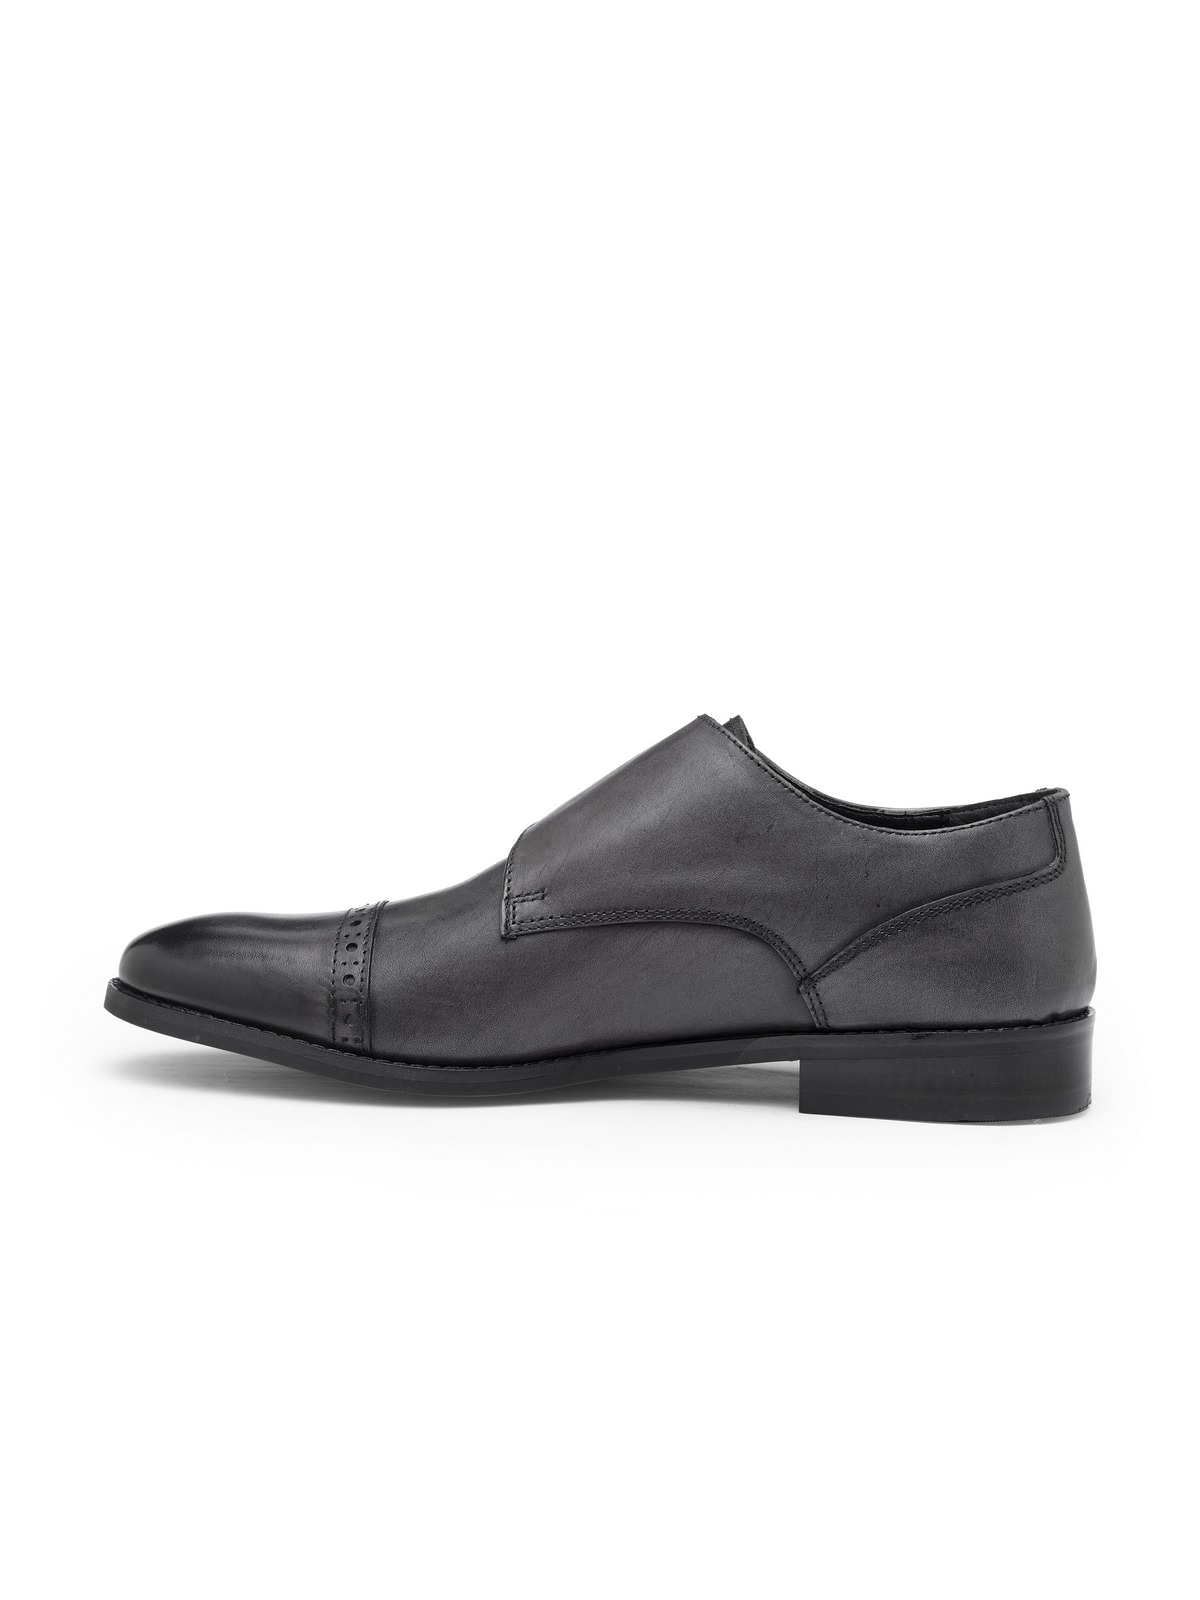 Buy Online Casual Monk Shoes | Casual Shoes For Men's